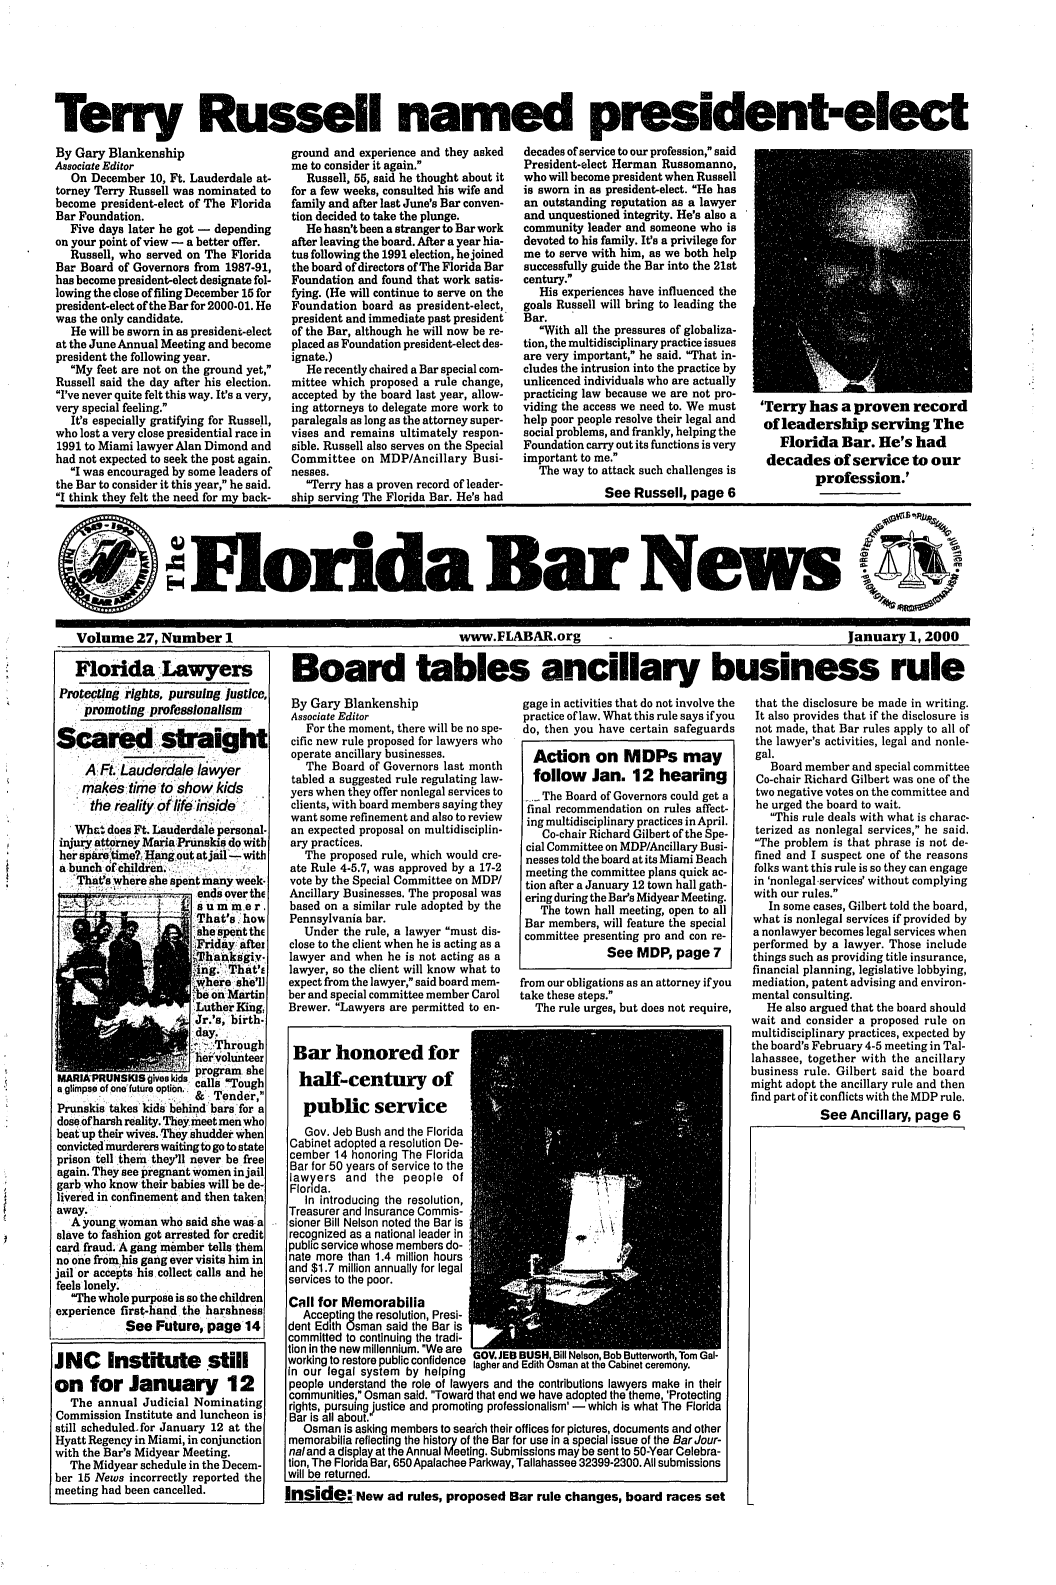 handle is hein.barjournals/flabn0027 and id is 1 raw text is: 







Terry Russell named president-elect


By Gary Blankenship
Associate Editor
   On December 10, Ft. Lauderdale at-
torney Terry Russell was nominated to
become president-elect of The Florida
Bar Foundation.
   Five days later he got - depending
on your point of view - a better offer.
   Russell, who served on The Florida
Bar Board of Governors from 1987-91,
has become president-elect designate fol-
lowing the close of filing December 15 for
president-elect of the Bar for 2000-01. He
was the only candidate.
   He will be sworn in as president-elect
at the June Annual Meeting and become
president the following year.
   My feet are not on the ground yet,
Russell said the day after his election.
I've never quite felt this way. It's a very,
very special feeling.
   It's especially gratifying for Russell,
who lost a very close presidential race in
1991 to Miami lawyer Alan Dimond and
had not expected to seek the post again.
   I was encouraged by some leaders of
the Bar to consider it this year, he said.
I think they felt the need for my back-


ground and experience and they asked
me to consider it again.
   Russell, 55, said he thought about it
for a few weeks, consulted his wife and
family and after last June's Bar conven-
tion decided to take the plunge.
   He hasn't been a stranger to Bar work
after leaving the board. After a year hia-
tus following the 1991 election, he joined
the board of directors of The Florida Bar
Foundation and found that work satis-
fying. (He will continue to serve on the
Foundation board as president-elect,
president and immediate past president
of the Bar, although he will now be re-
placed as Foundation president-elect des-
ignate.)
   He recently chaired a Bar special com-
mittee which proposed a rule change,
accepted by the board last year, allow-
ing attorneys to delegate more work to
paralegals as long as the attorney super-
vises and remains ultimately respon-
sible. Russell also serves on the Special
Committee on MDP/Ancillary Busi-
nesses.
   Terry has a proven record of leader-
ship serving The Florida Bar. He's had


decades of service to our profession, said
President-elect Herman Russomanno,
who will become president when Russell
is sworn in as president-elect. He has
an outstanding reputation as a lawyer
and unquestioned integrity. He's also a
community leader and someone who is
devoted to his family. It's a privilege for
me to serve with him, as we both help
successfully guide the Bar into the 21st
century.
   His experiences have influenced the
goals Russell will bring to leading the
Bar.
   With all the pressures of globaliza-
tion, the multidisciplinary practice issues
are very important, he said. That in-
cludes the intrusion into the practice by
unlicenced individuals who are actually
practicing law because we are not pro-
viding the access we need to. We must
help poor people resolve their legal and
social problems, and frankly, helping the
Foundation carry out its functions is very
important to me.
   The way to attack such challenges is
              See Russell, page 6


'Terry has a proven record
of leadership serving The
   Florida Bar. He's had
 decades of service to our
         profession.'


Volume 27, Number I                                             www.FLABAR.org                                                   January 1, 2000

Florida-Lawyers1 Board tables ancillary business rule


Protecdn ,rightspursuing. justice
    promoting professionalism
Scared straht


    AFtLaudedaie lawyer
    M .akes:time to show kids


                       a .,;Through

 I                     program she
 MARM-PRUNSKIS Oves kds.-el ,,:...
a glimpse of onefutre option.I caIs Tough
                       & Tender,'
Prunskis takes kids behind bars for a
doseofharsh reality. They meet men who
beat up their wivbs.,They shudder when
convicted murderers waiting to go to state
prison tell them they'll never be free
again. They see pregnant women in jail
garb who know their babies will be de-
livered in confinement and then taken
away.
  'A youngwoman who said she was:a
slave to fashion got arrested for credit
card fraud. A gang member tells them
no one fromnhis gang ever visits him in
jail or accepts his collect calls and he
feels lonely.
   The whole purpose is so the children
experience first-hand the harshness
           See Future, page14


JNC Institute still
on for January 12
   The annual Judicial Nominating
Commission Institute and luncheon is
still scheduled.for January 12 at the
Hyatt Regency in Miami, in conjunction
with the Bar's Midyear Meeting.
   The Midyear schedule in the Decem-
ber 15 News incorrectly reported the
meeting had been cancelled.


By Gary Blankenship
Associate Editor
   For the moment, there will be no spe-
cific new rule proposed for lawyers who
operate ancillary businesses.
   The Board of Governors last month
 tabled a suggested rule regulating law-
 yers when they offer nonlegal services to
 clients, With board members saying they
 want some refinement and also to review
 an expected proposal on multidisciplin-
 ary practices.
   The proposed rule, which would cre-
ate Rule 4-5.7, was approved by a 17-2
vote by the Special Committee on MDP/
Ancillary Businesses. The proposal was
based on a similar rule adopted by the
Pennsylvania bar.
   Under the rule, a lawyer must dis-
close to the client when he is acting as a
lawyer and when he is not acting as a
lawyer, so the client will know what to
expect from the lawyer, said board mem-
ber and special committee member Carol
Brewer. Lawyers are permitted to en-


Bar honored for

  half-century of

  public service
  Gov. Jeb Bush and the Florida
Cabinet adopted a resolution De-
cember 14 honoring The Florida
Bar for 50 years of service to the
lawyers and the people of
Florida.
   In introducing the resolution,
Treasurer and Insurance Commis-
sioner Bill Nelson noted the Bar is
recognized as a national leader in
public service whose members do-
nate more than 1.4 million hours
and $1.7 million annually for legal
services to the poor.


lw


gage in activities that do not involve the
practice of law. What this rule says if you
do, then you have certain safeguards

  Action on MDPs may
  follow Jan. 12 hearing
  --The Board of Governors could get a
  final recommendation on rules affect-
  ing multidisciplinary practices in April.
    Co-chair Richard Gilbert of the Spe-
 cial Committee on MDP/Ancillary Busi-
 nesses told the board at its Miami Beach
 meeting the committee plans quick ac-
 tion after a January 12 town hall gath-
 ering during the Bar's Midyear Meeting.
   The town hall meeting, open to all
 Bar members, will feature the special
 committee presenting pro and con re-
               See MDP, page 7

from our obligations as an attorney if you
take these steps.
   The rule urges, but does not require,


Call for Memorabilia
   Accepting the resolution, Presi-
 dent Edith Osman said the Bar is
 committed to continuing the tradi-
 tion in the new millennium. We are GOV.JEB BUSH, Bill Nelson, Bob Butterworth, Tom Gal-
 working to restore public confidence lagher and Edith Osman at the Cabinet ceremony.
 in our legal system by helping
 people understand the role of lawyers and the contributions lawyers make in their
 communities, Osman said. Toward that end we have adopted the theme, 'Protecting
 rights, pursuingjustice and promoting professionalism' - which is what The Florida
 Bar is all about.
   Osman is asking members to search their offices for pictures, documents and other
 memorabilia reflecting the history of the Bar for use in a special issue of the Bar Jour-
 naland a display at the Annual Meeting. Submissions may be sent to 50-Year Celebra-
 tion, The Florida Bar, 650 Apalachee Parkway, Tallahassee 32399-2300. All submissions
 will be returned.
Inside: New ad rules, proposed Bar rule changes, board races set


that the disclosure be made in writing.
It also provides that if the disclosure is
not made, that Bar rules apply to all of
the lawyer's activities, legal and nonle-
gal.
   Board member and special committee
 Co-chair Richard Gilbert was one of the
 two negative votes on the committee and
 he urged the board to wait.
   This rule deals with what is charac-
 terized as nonlegal services, he said.
 The problem is that phrase is not de-
 fined and I suspect one of the reasons
 folks want this rule is so they can engage
 in 'nonlegal-services' without complying
 with our rules.
   In some cases, Gilbert told the board,
what is nonlegal services if provided by
a nonlawyer becomes legal services when
performed by a lawyer. Those include
things such as providing title insurance,
financial planning, legislative lobbying,
mediation, patent advising and environ-
mental consulting.
   He also argued that the board should
wait and consider a proposed rule on
multidisciplinary practices, expected by
the board's February 4-5 meeting in Tal-
lahassee, together with the ancillary
business rule. Gilbert said the board
might adopt the ancillary rule and then
find part of it conflicts with the MDP rule.
            See Ancillary, page 6


